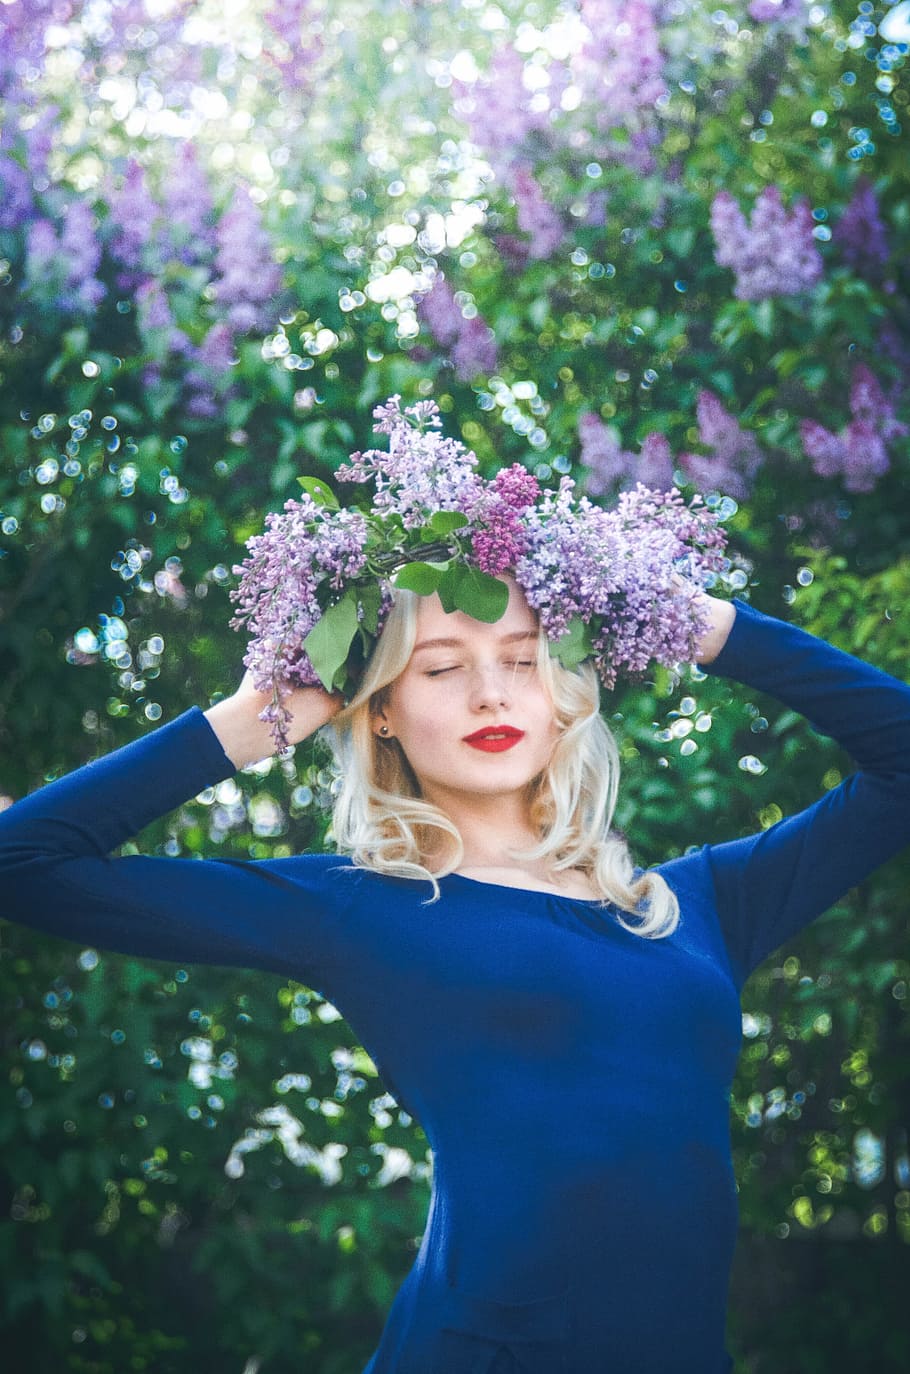 woman wearing blue long-sleeved shirt with purple flowers, girl